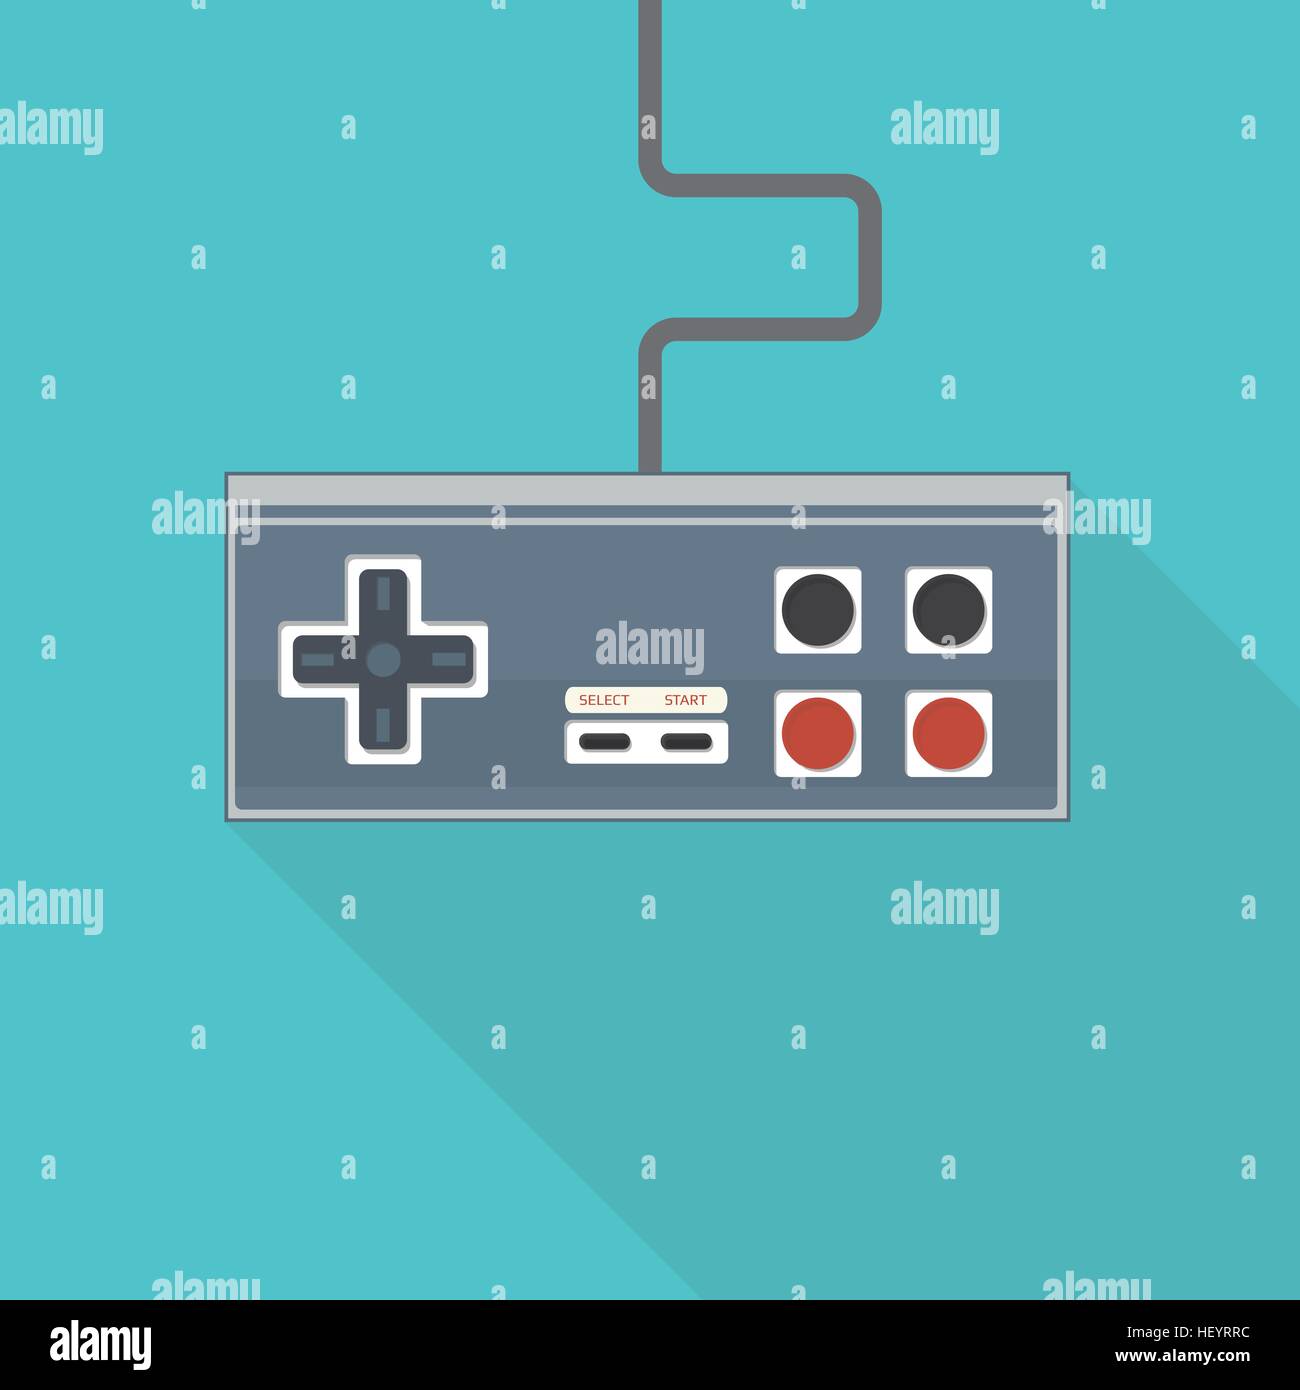 Classic flat style vector illustration of rectangular joystick like gamepad with analog buttons and stick with wire. Stock Vector